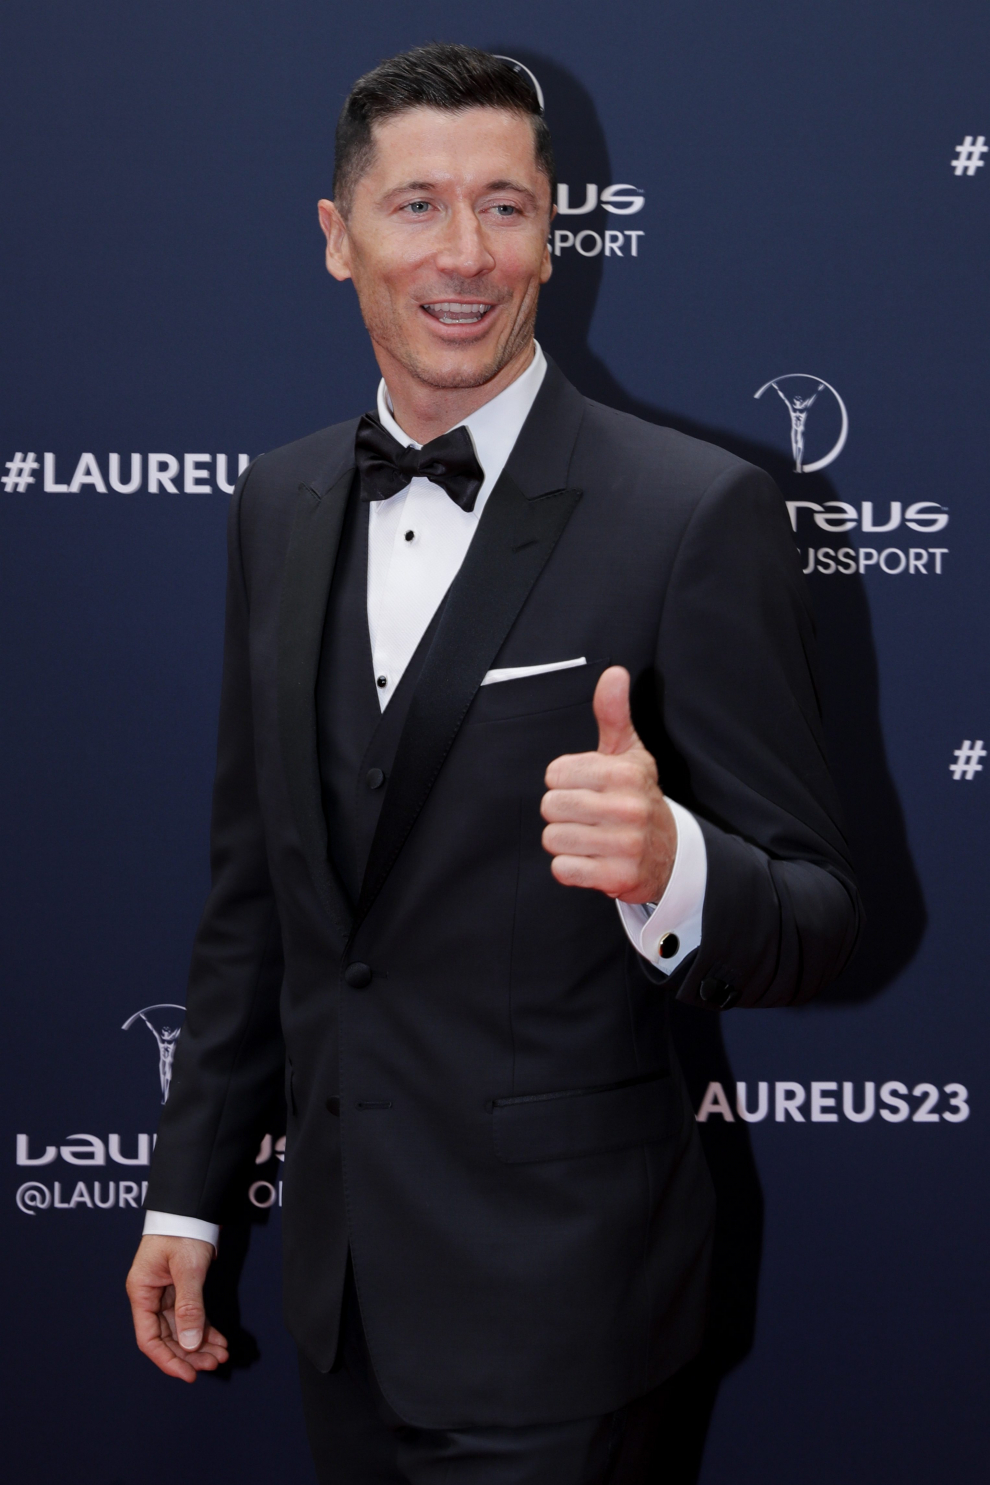 Paris (France), 08/05/2023.- Spanish tennis player Carlos Alcaraz arrives for the 2023 Laureus World Sports Awards in Paris, France, 08 May 2023. The awards ceremony will be an in-person event again after two years of virtual presentations due to the Covid-19 pandemic. (Tenis, Francia) EFE/EPA/TERESA SUAREZ
 FRANCE LAUREUS AWARDS